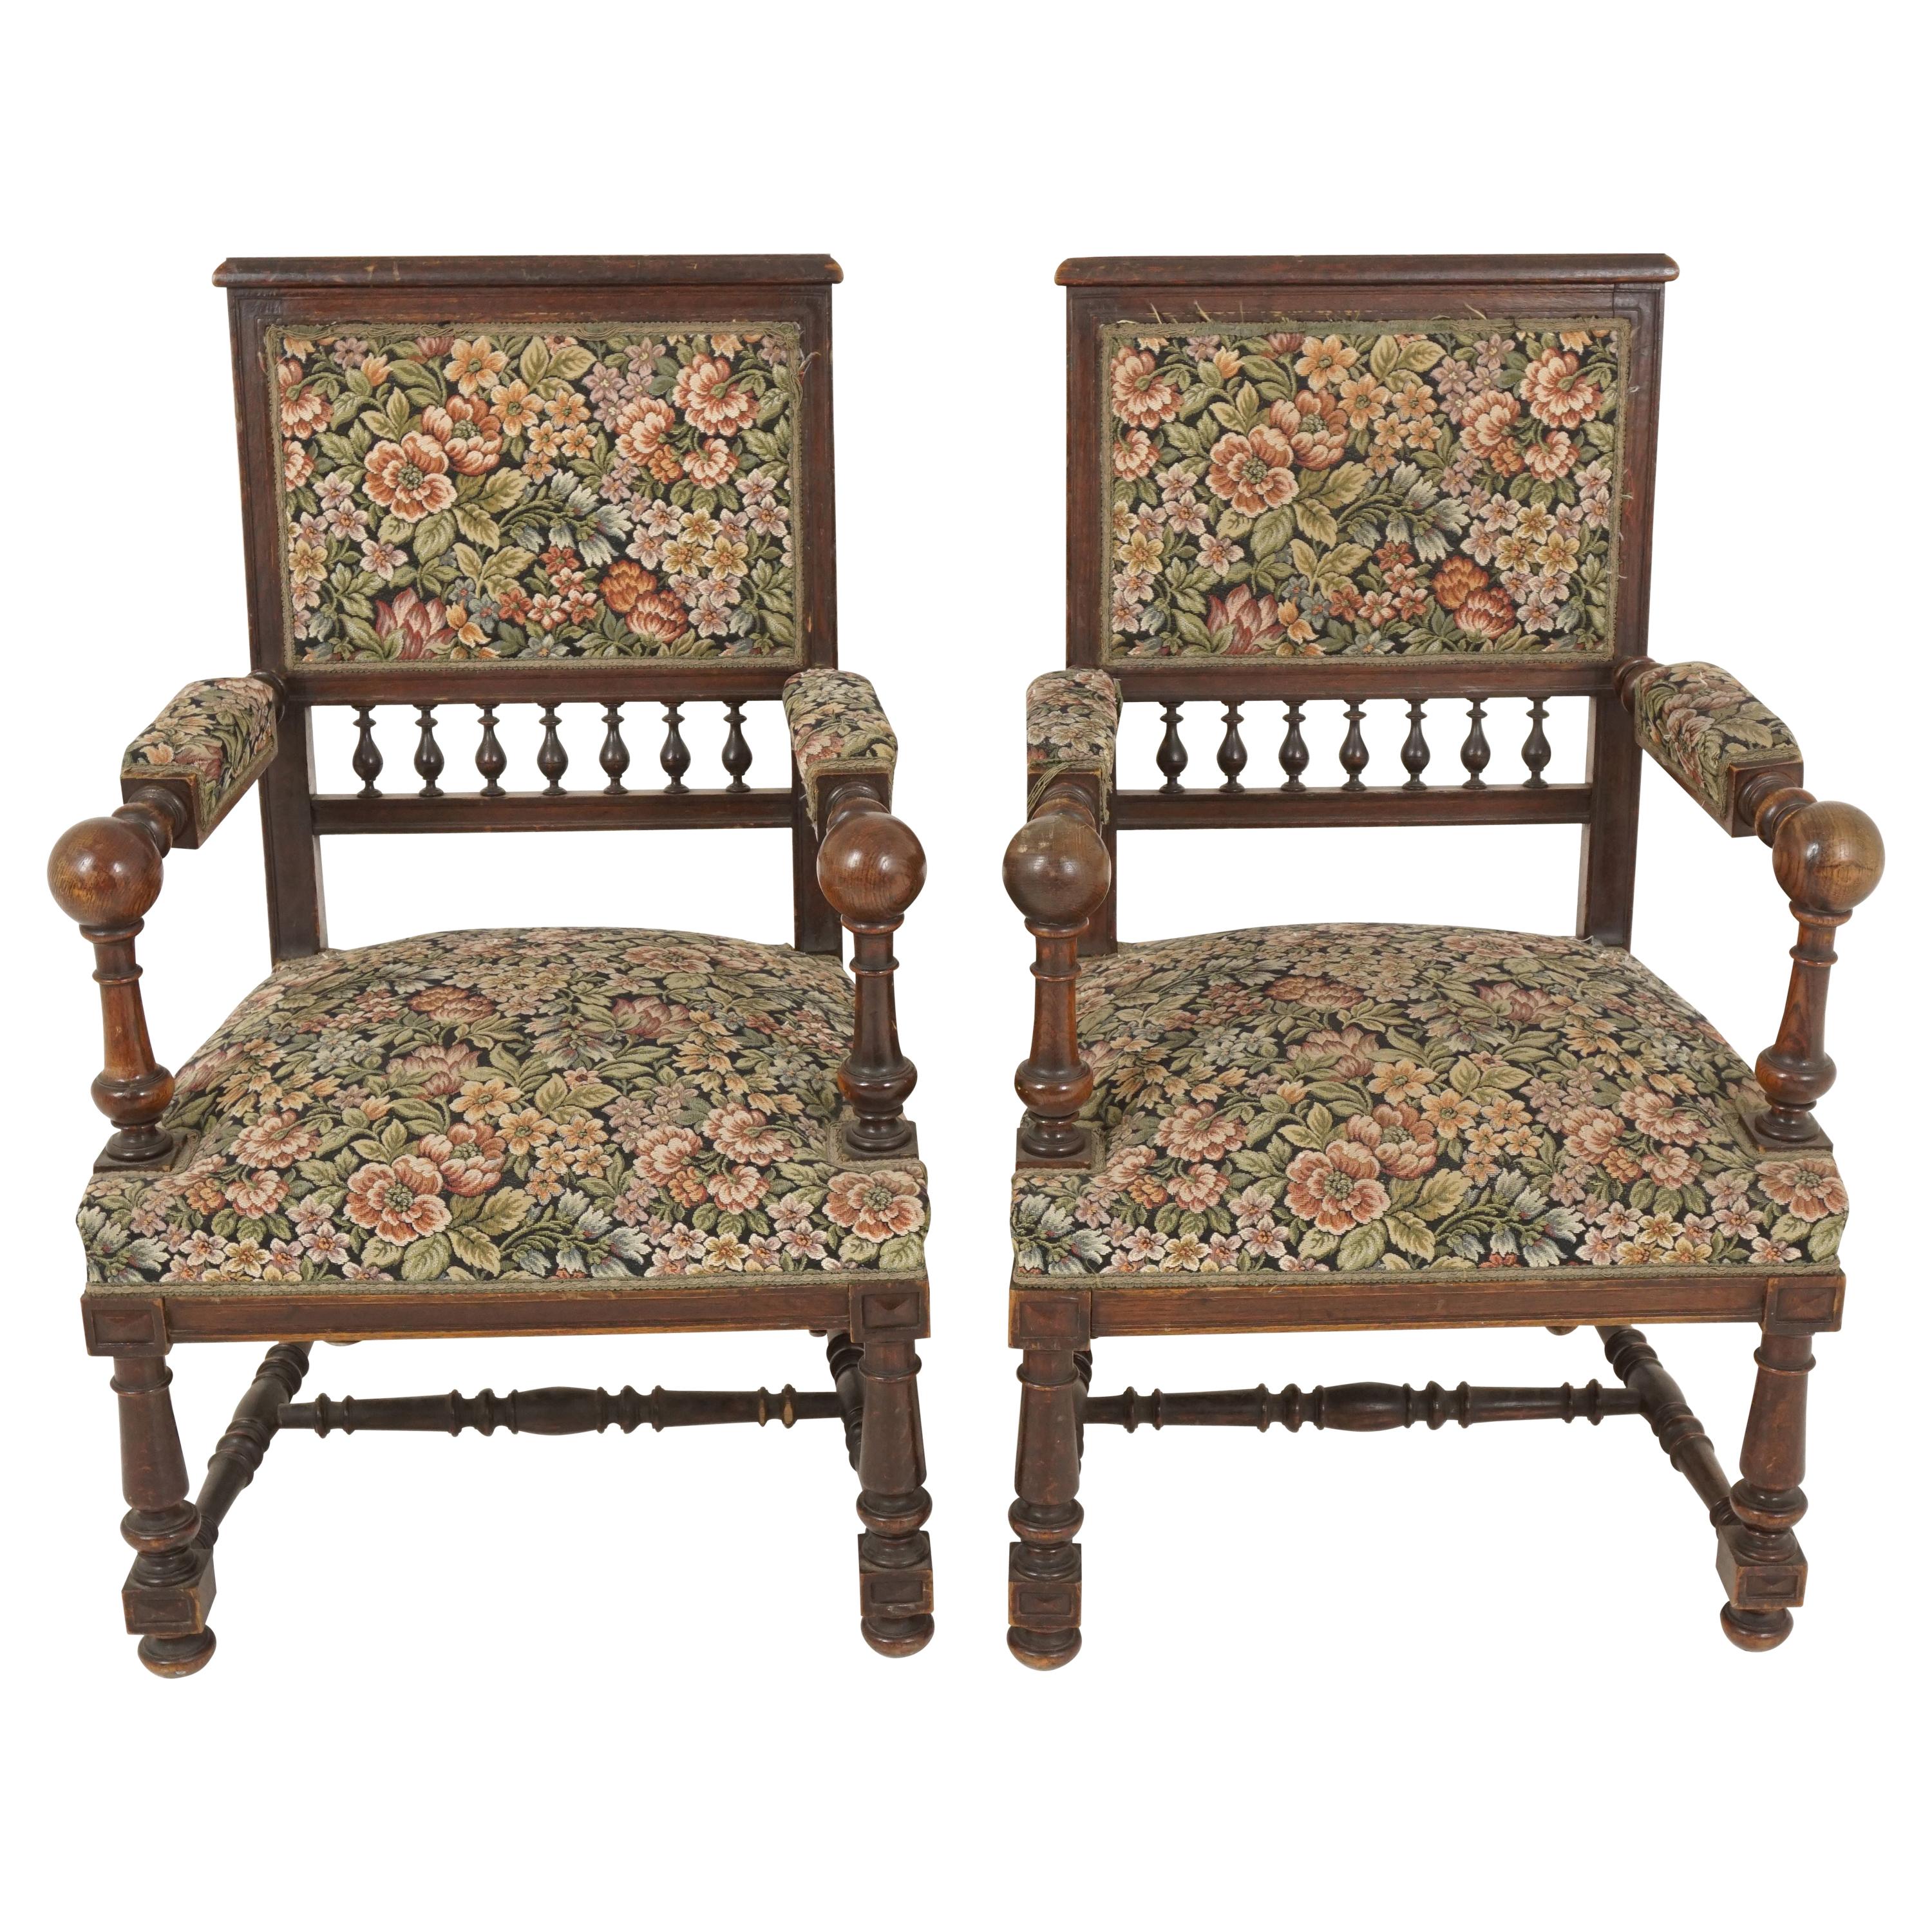 Antique Pair of Arm Chairs, Carved Oak, Upholstered Chairs, Scotland 1900, B2523